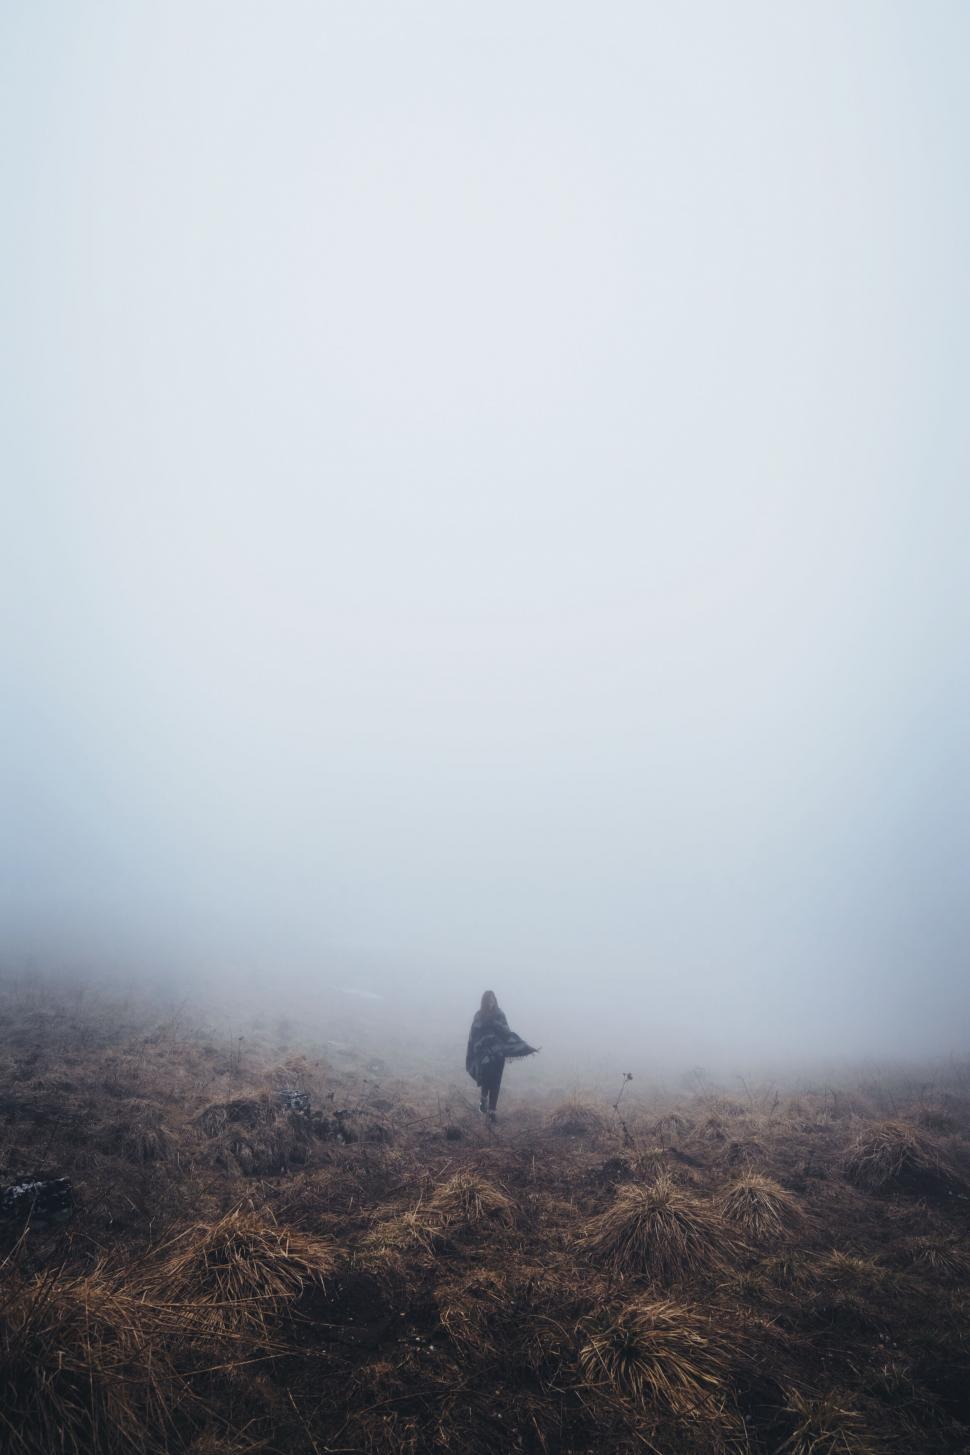 Free Image of A person walking in a foggy field 